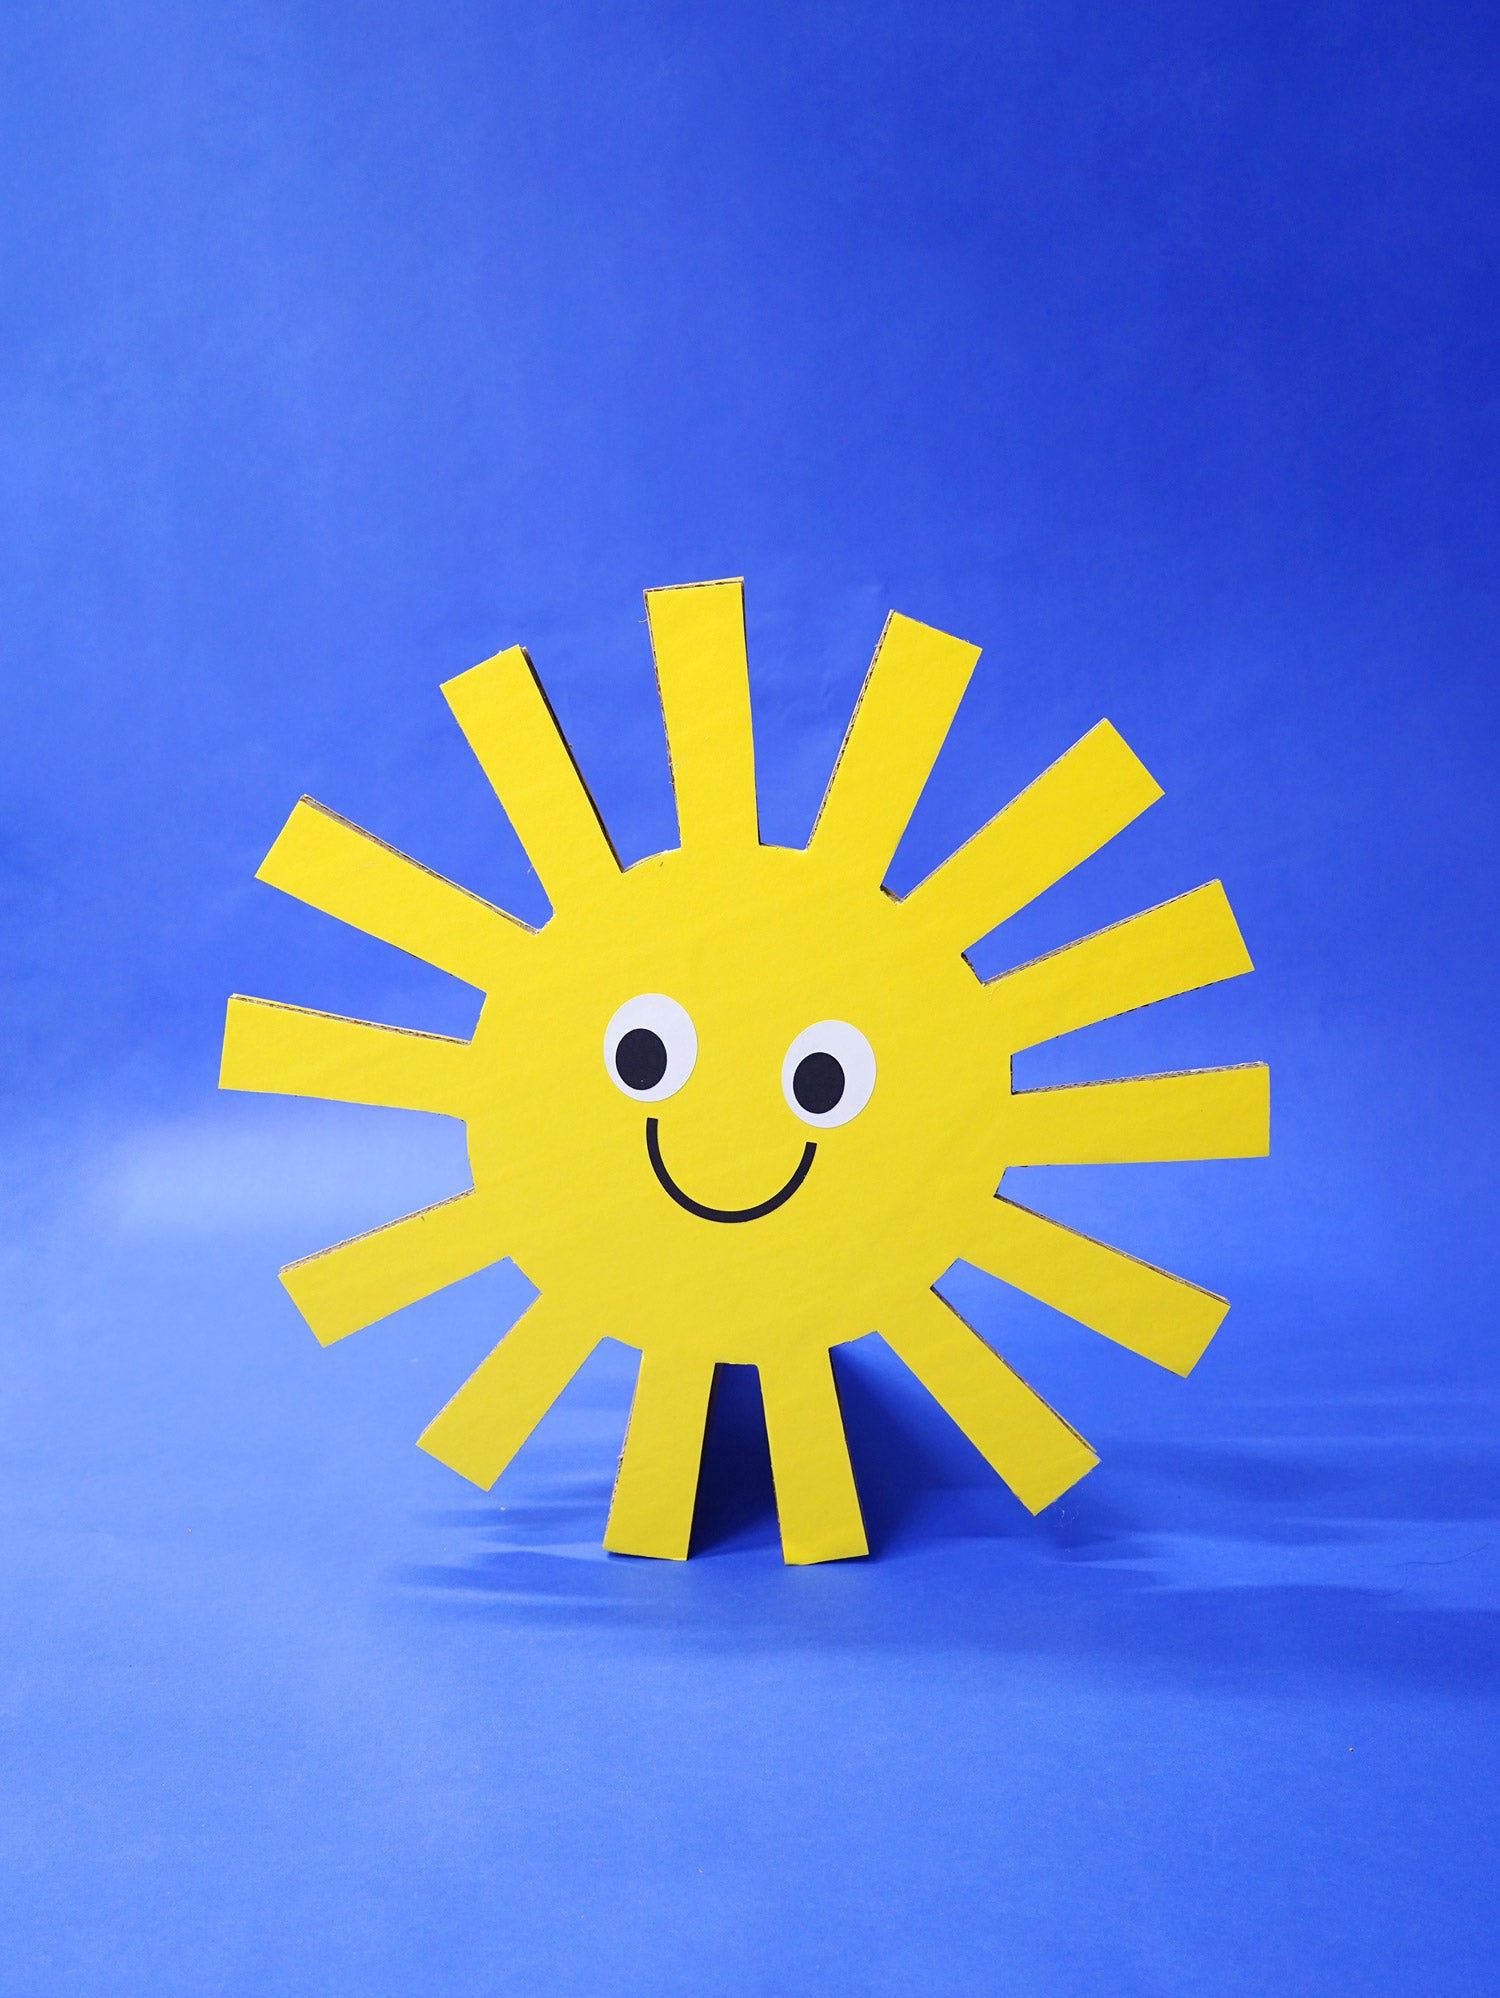 An oversized yellow cardboard cutout sun prop with a smiley face stands against a blue backdrop.